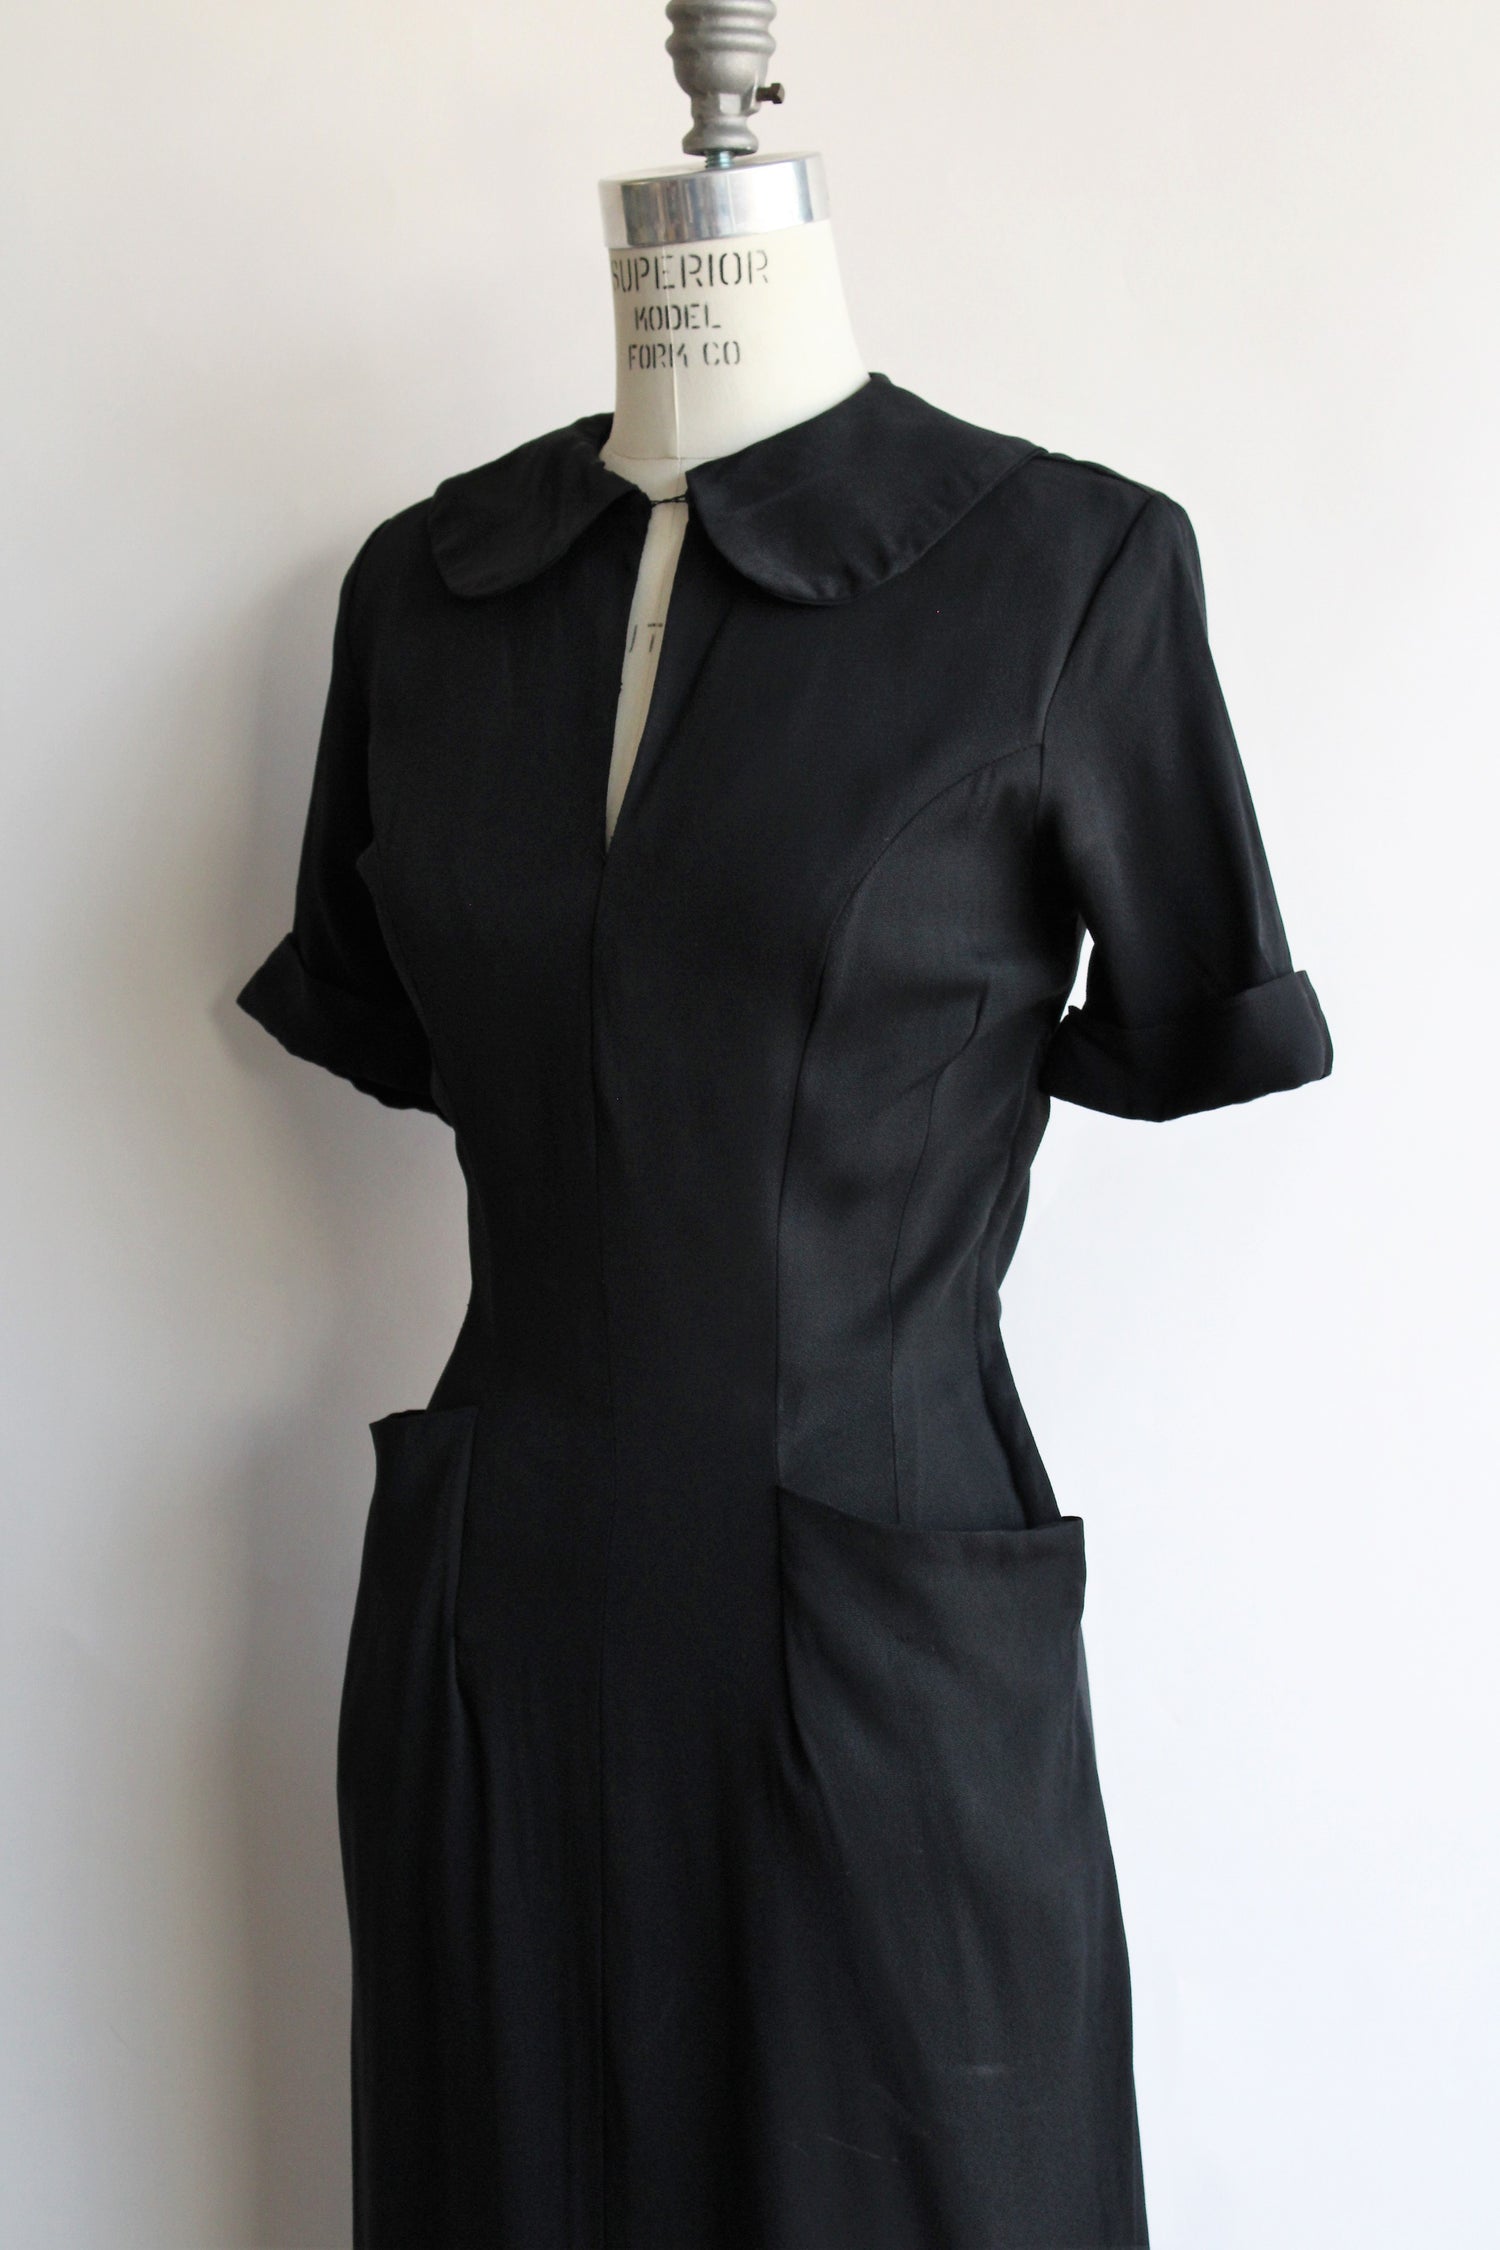 Vintage 1940s Rayon Crepe Dress with Pockets, Keyhole Neck and